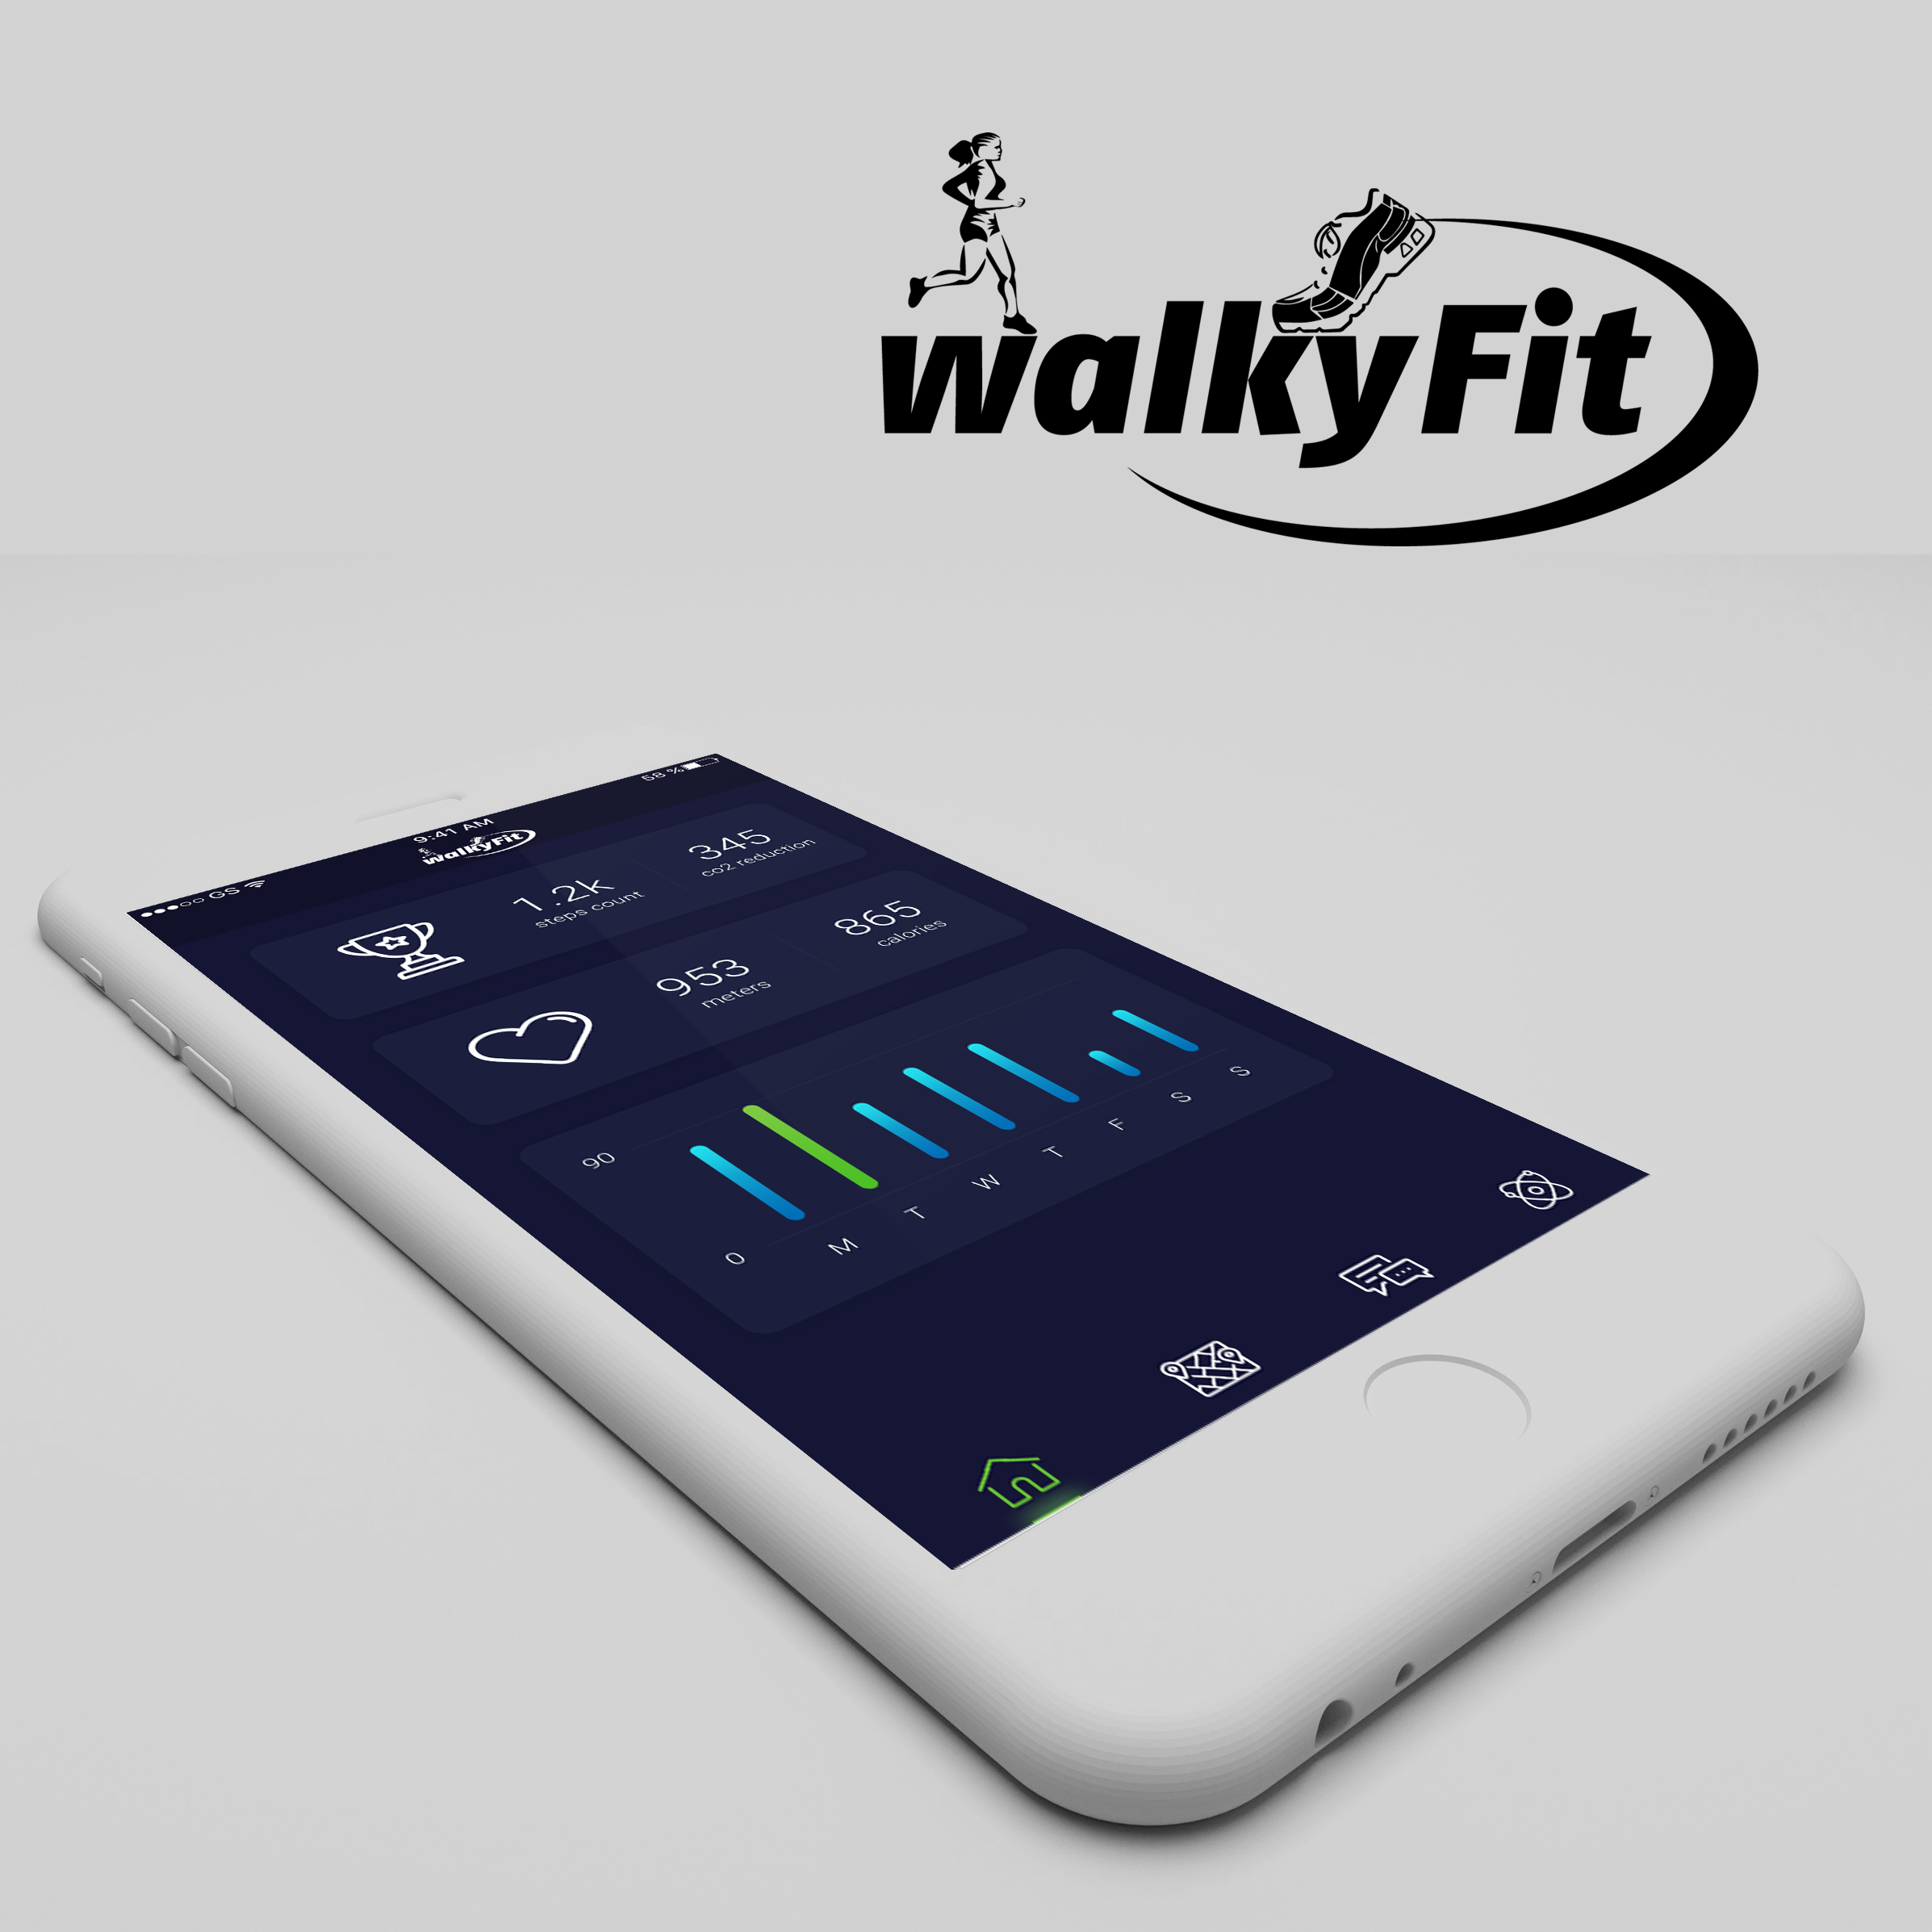 WalkyFit (cryptocurrency for activities)